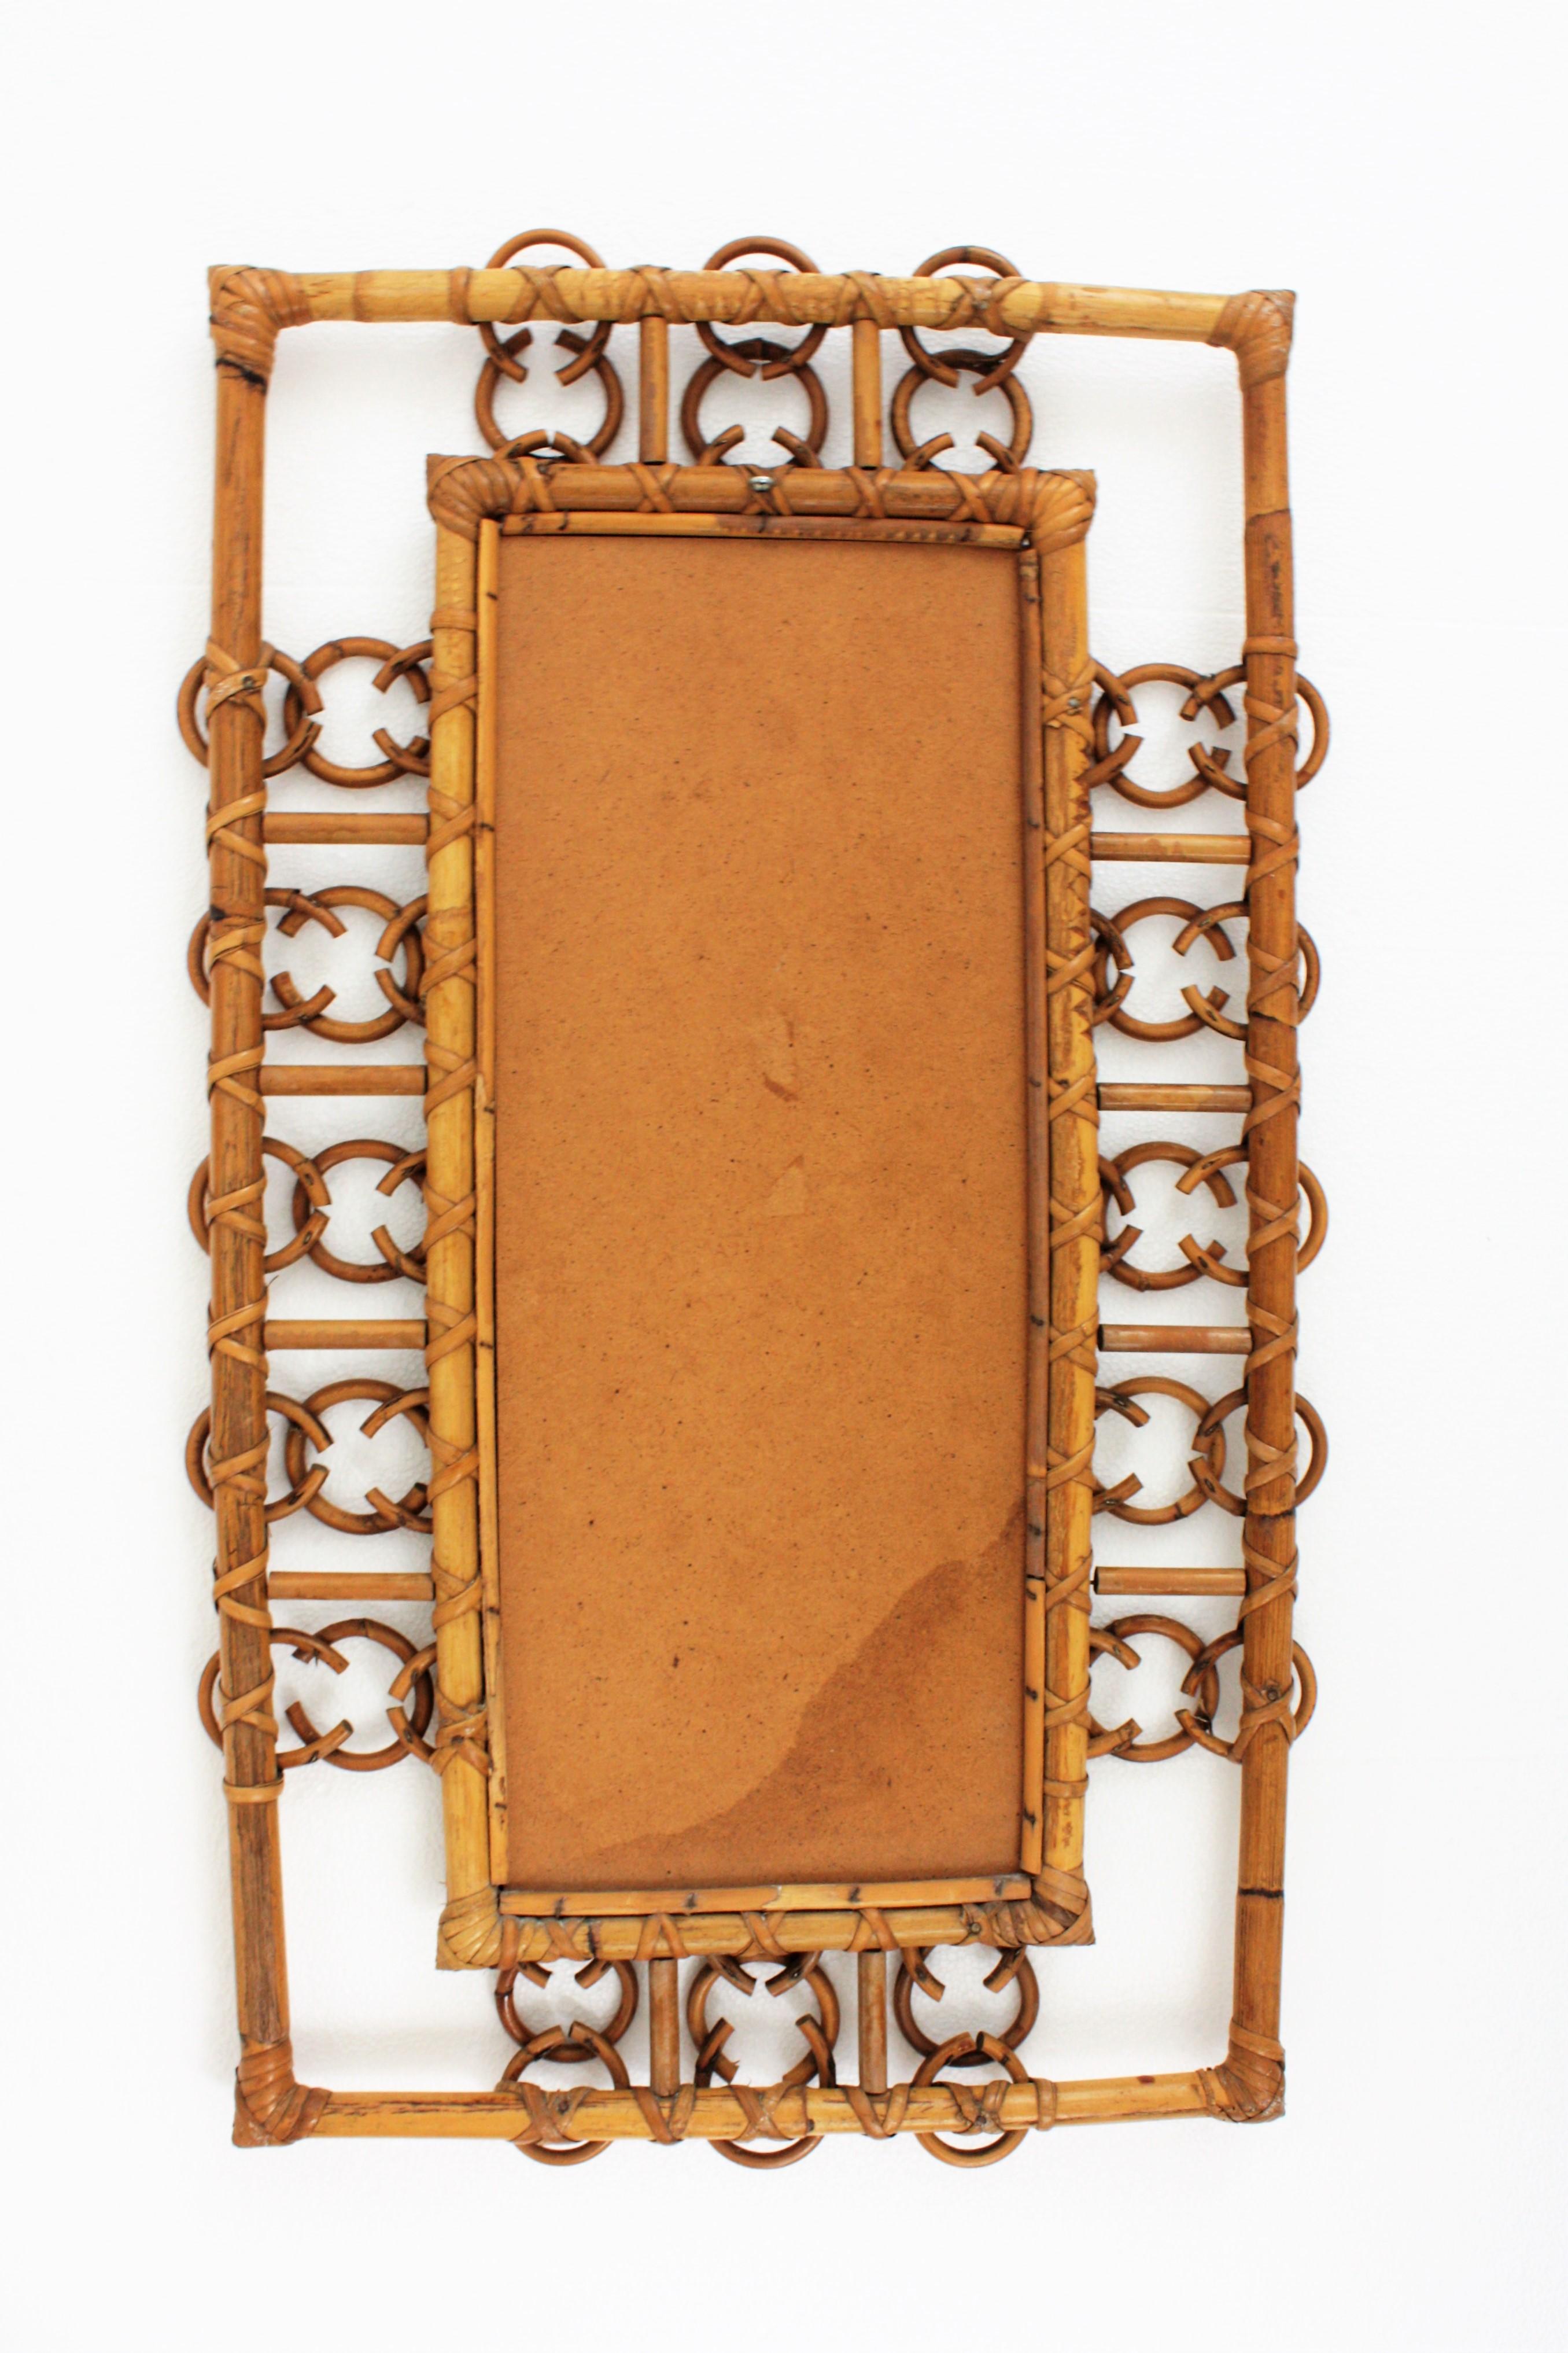 French Rattan Rectangular Mirror with Ring Details, 1950s For Sale 2